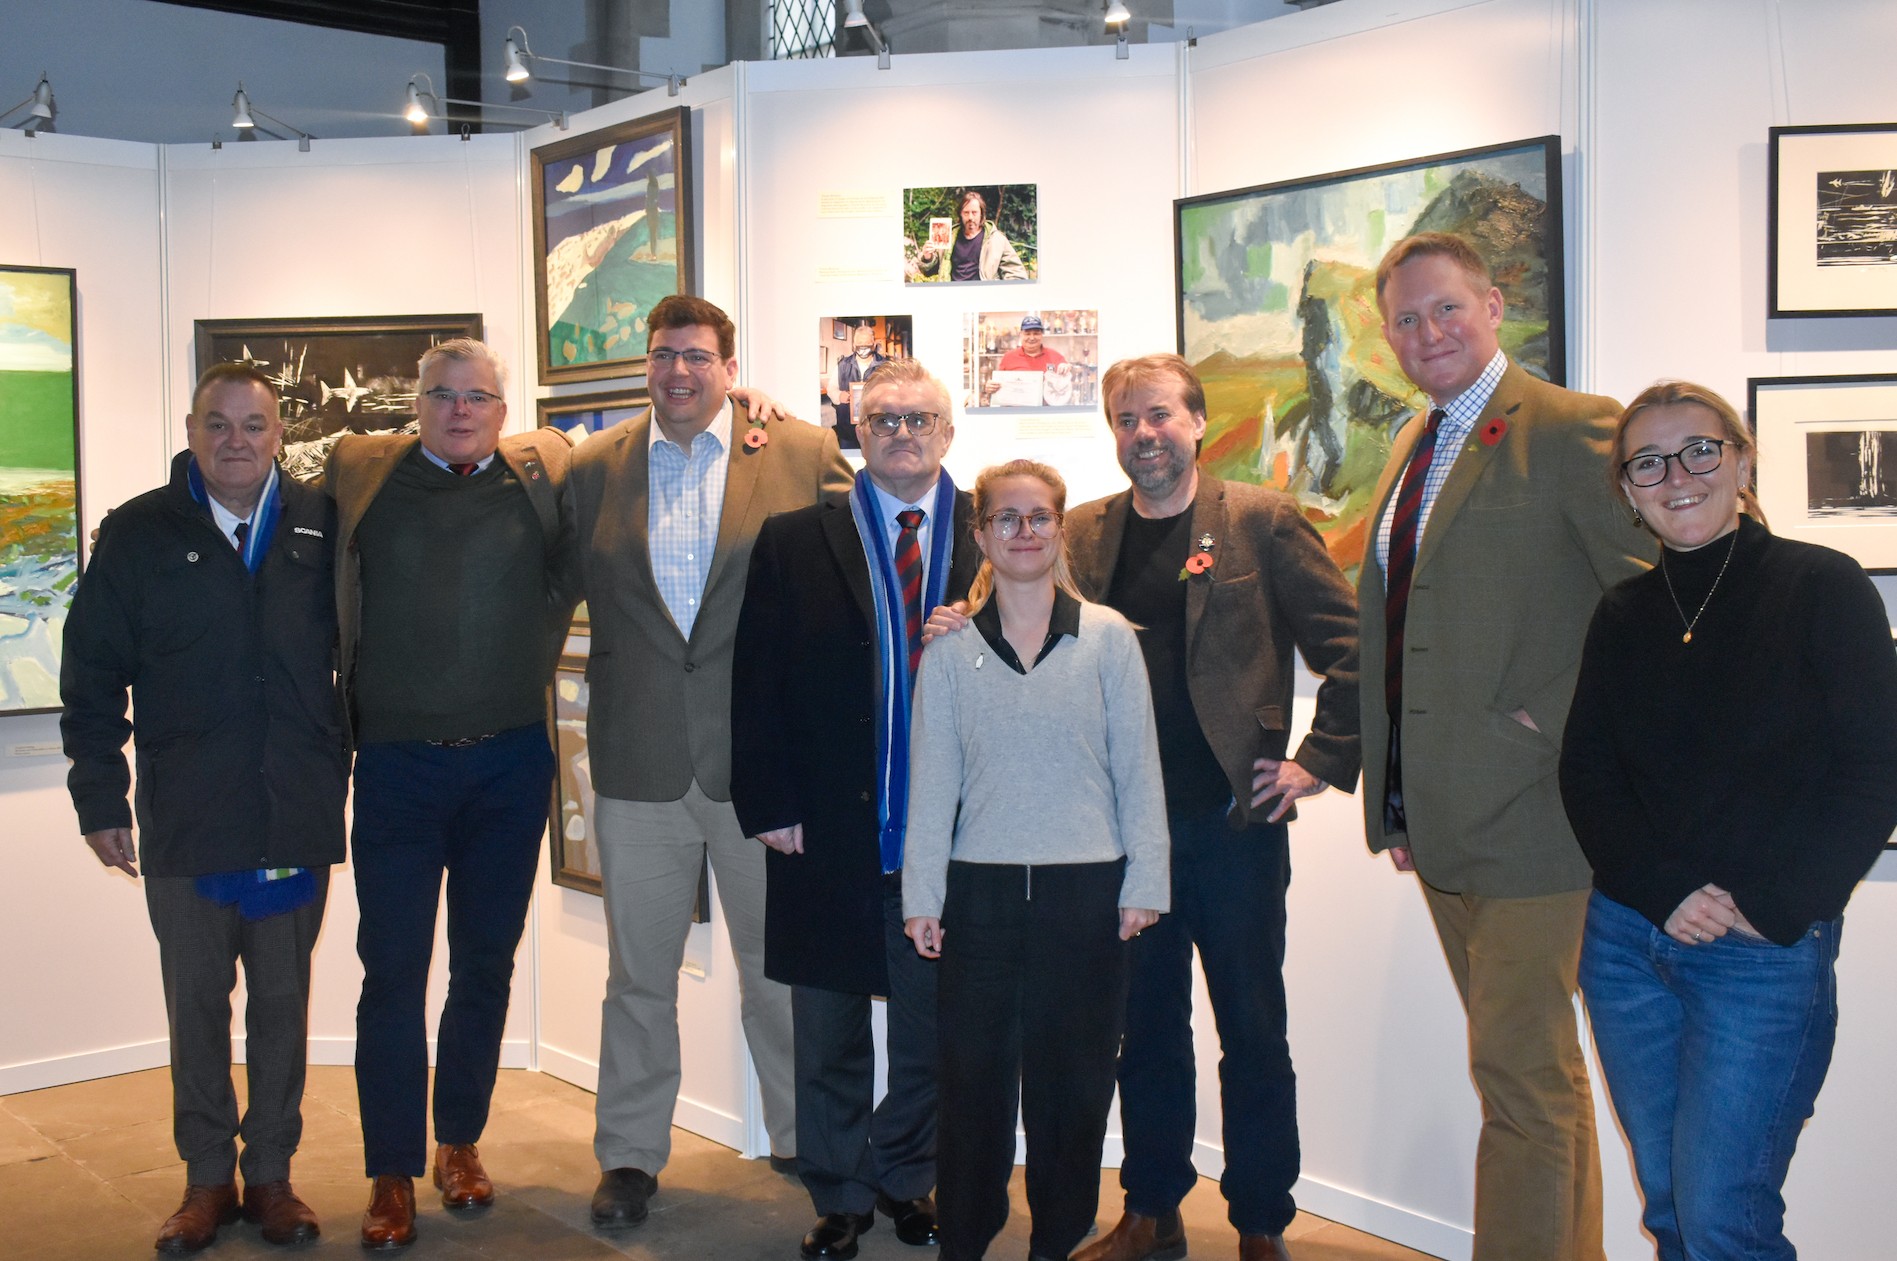 Falklands veterans and waterloo uncovered staff in front of an exhibition of Doug Farthing's artwork.